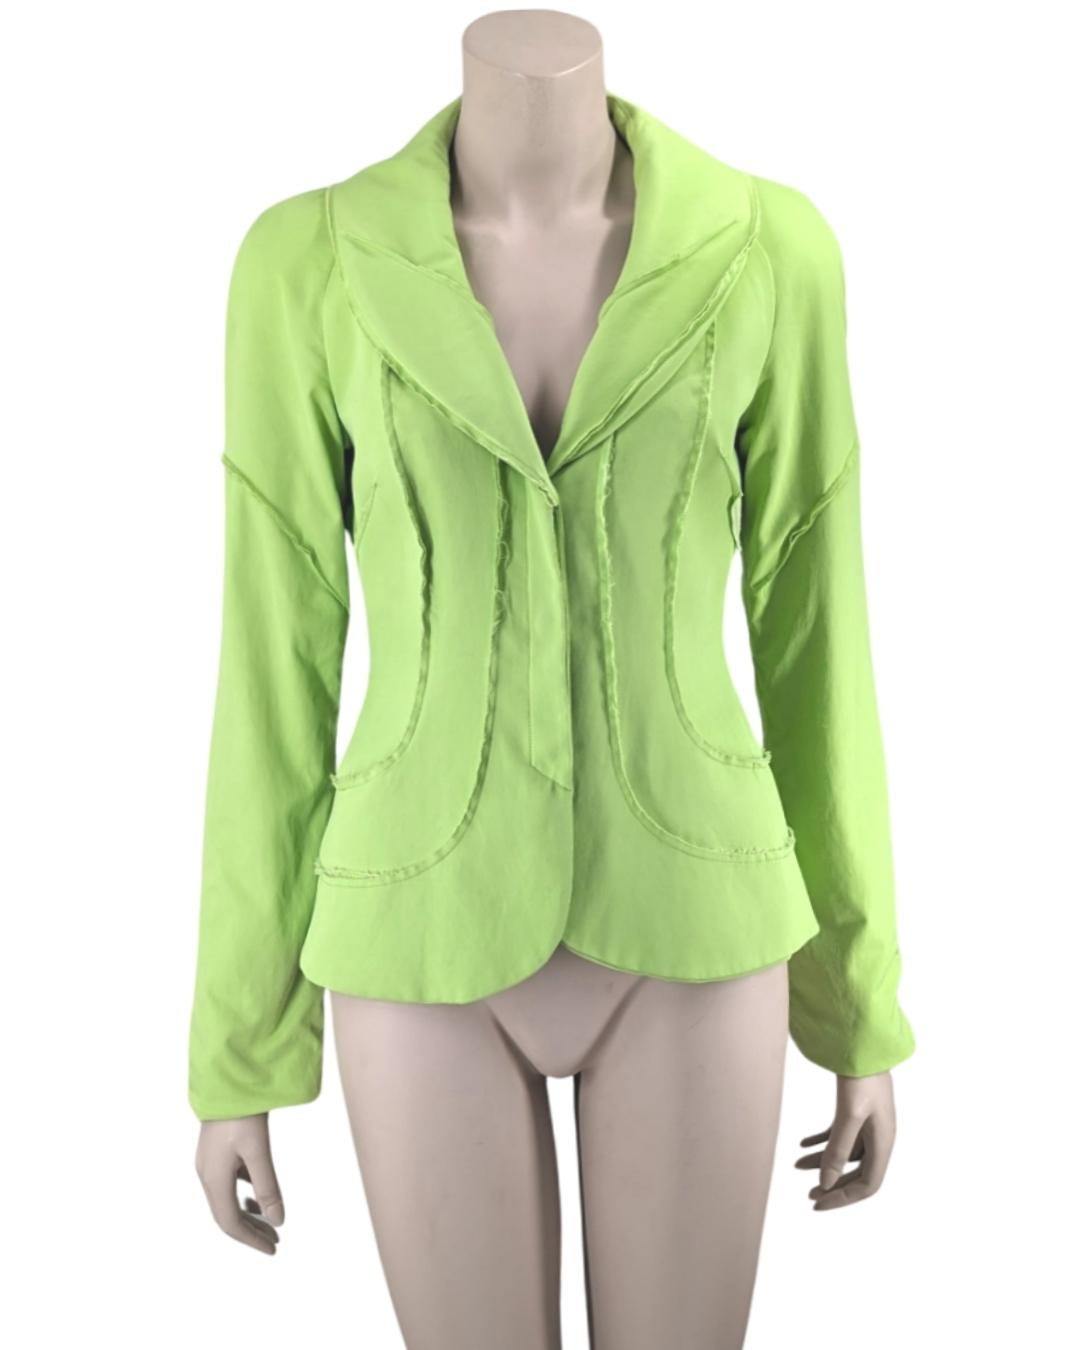 Women's Mugler Acid Green Jacket  with its iconic shape For Sale